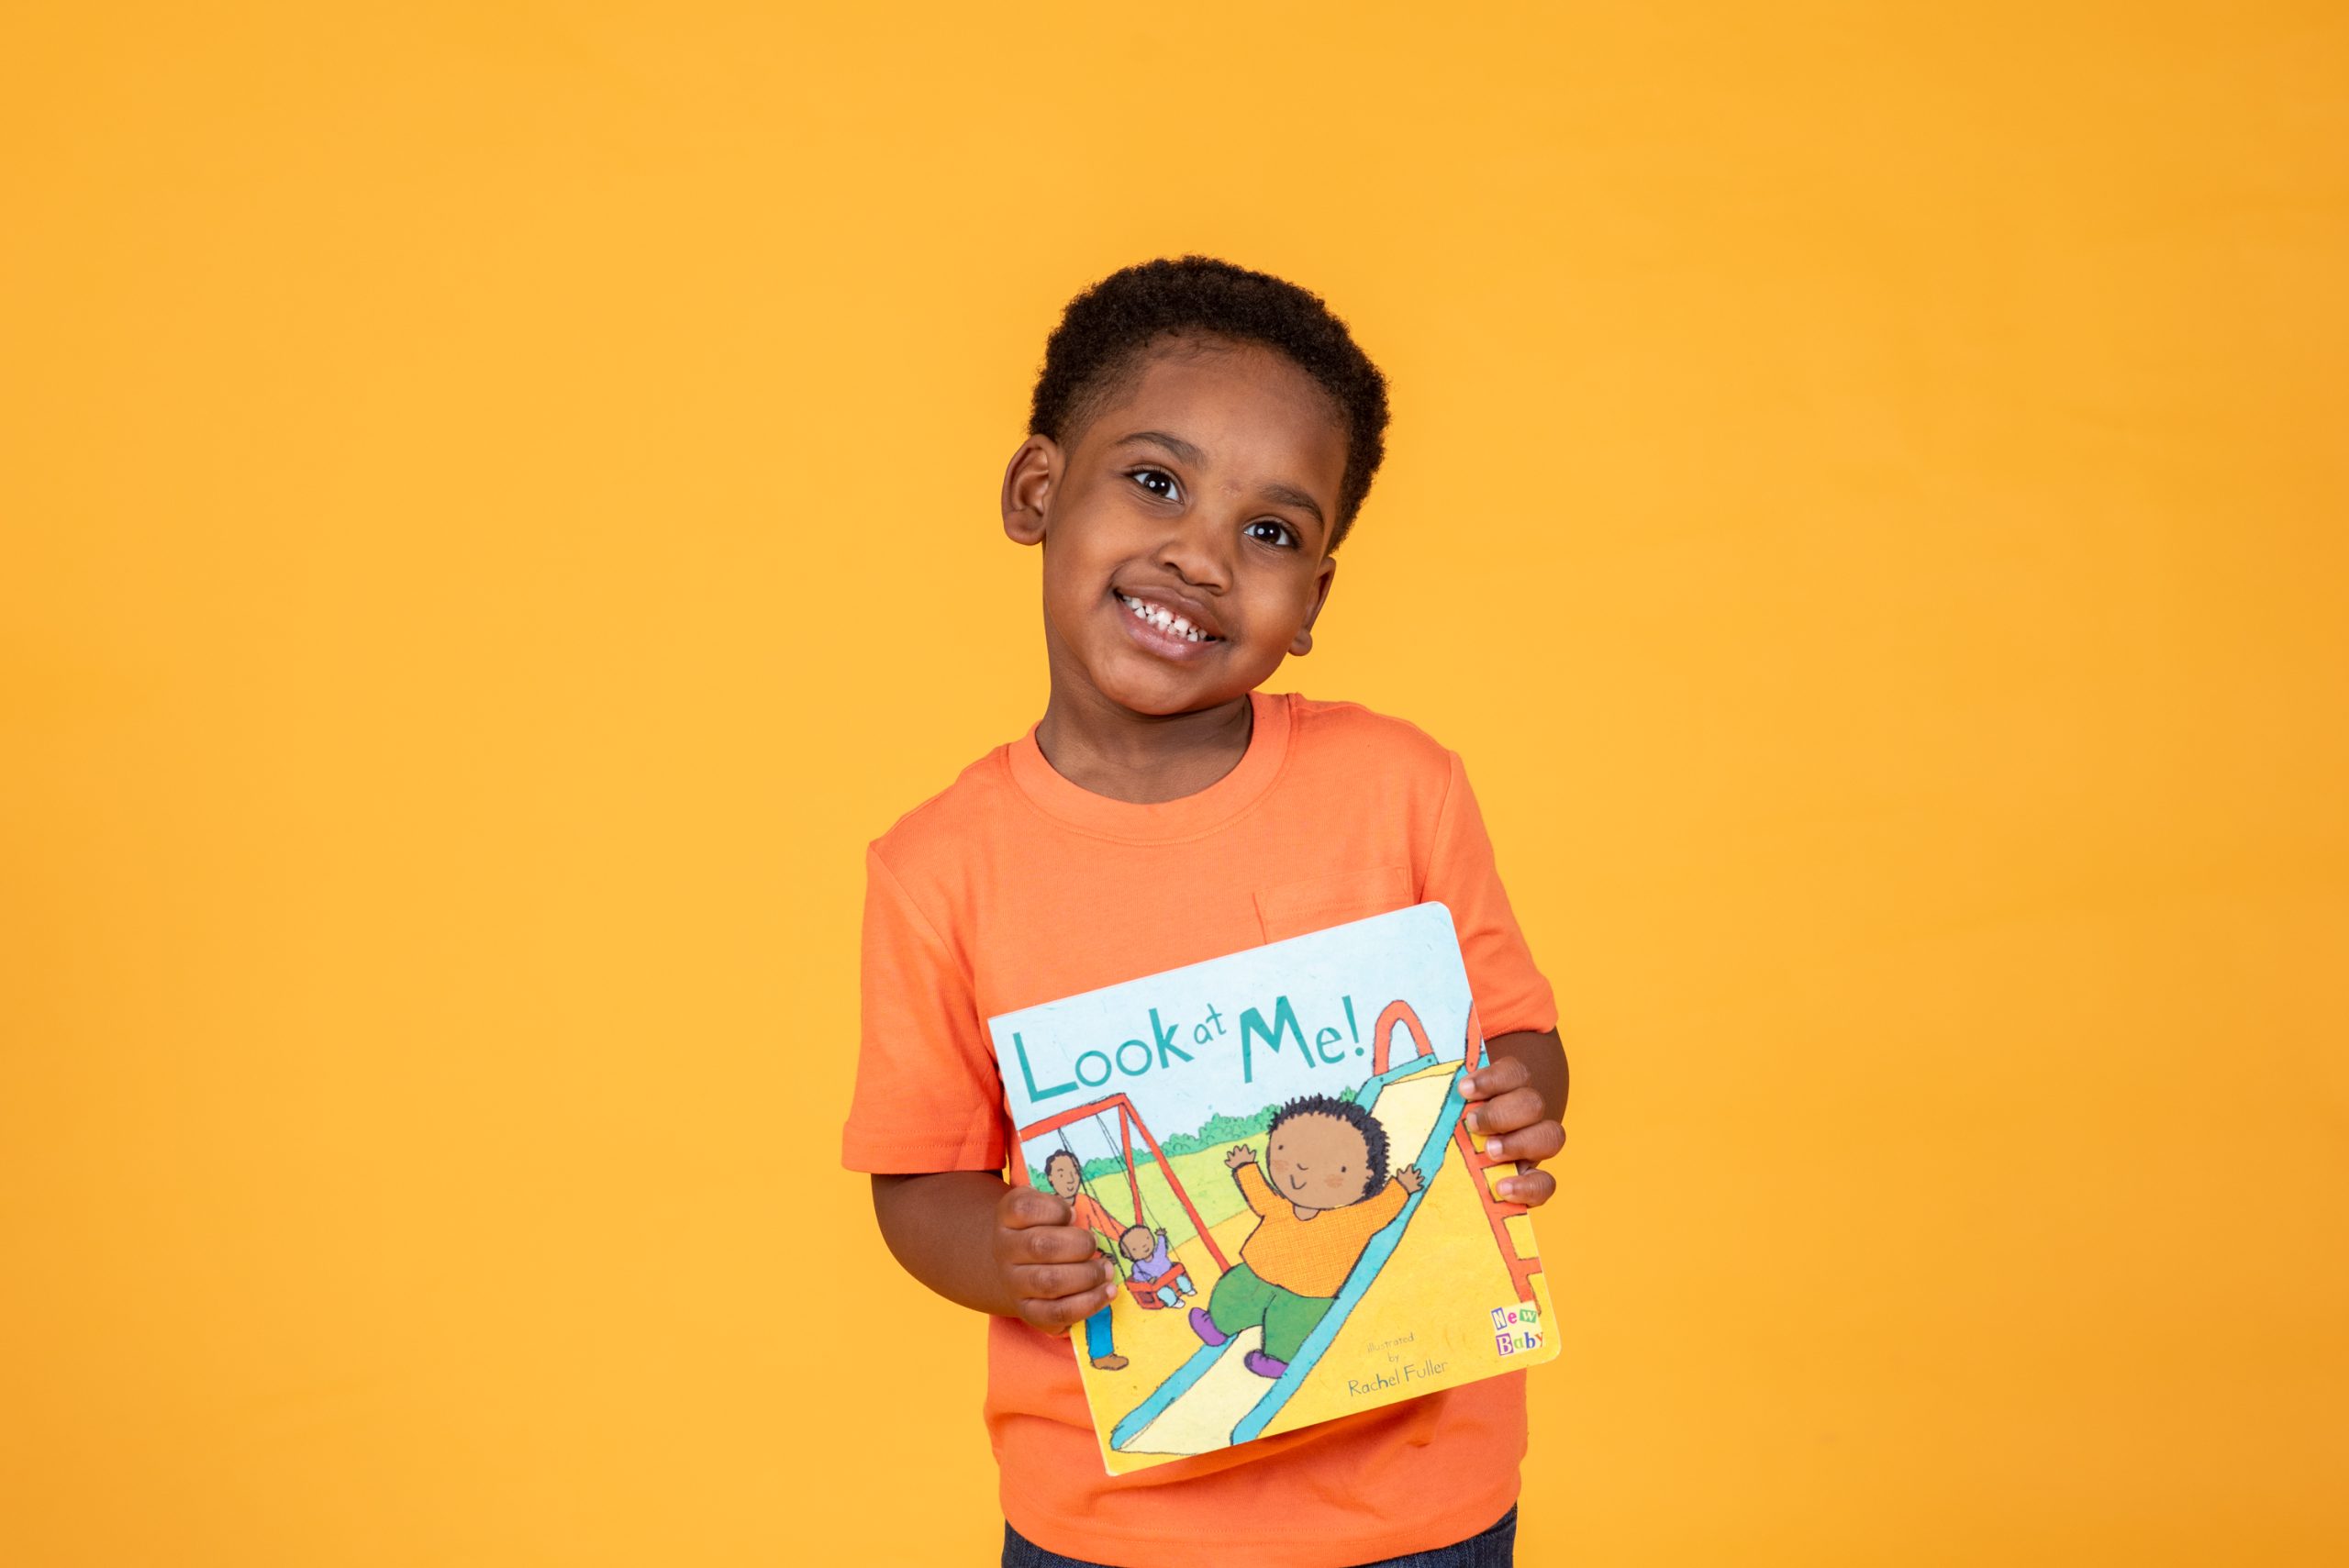 boy against yellow background holding book